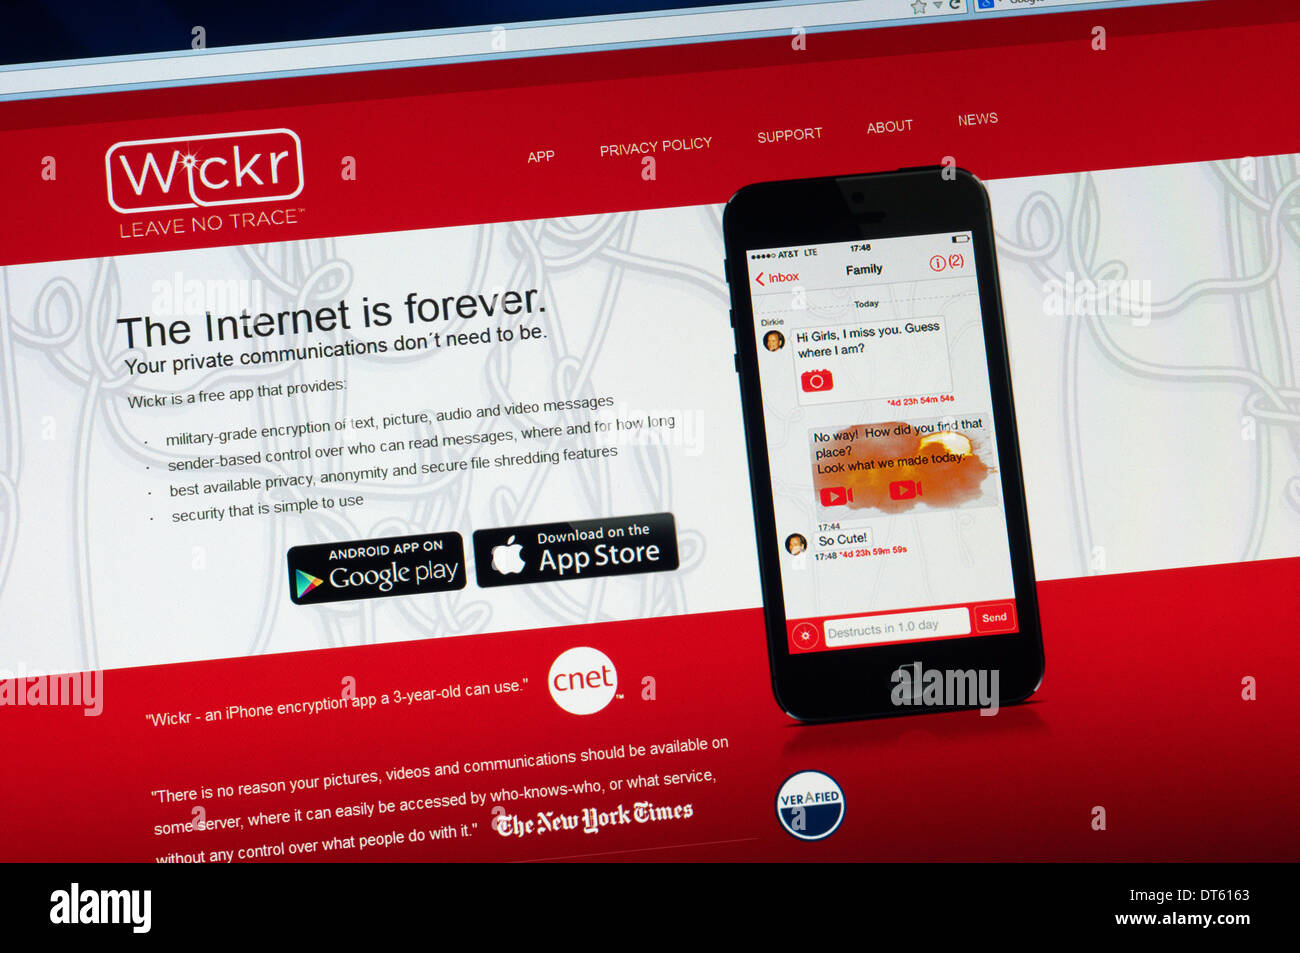 The Wickr mobile 'phone app claims to provide secure encryption for text, picture, audio & video messages. Stock Photo